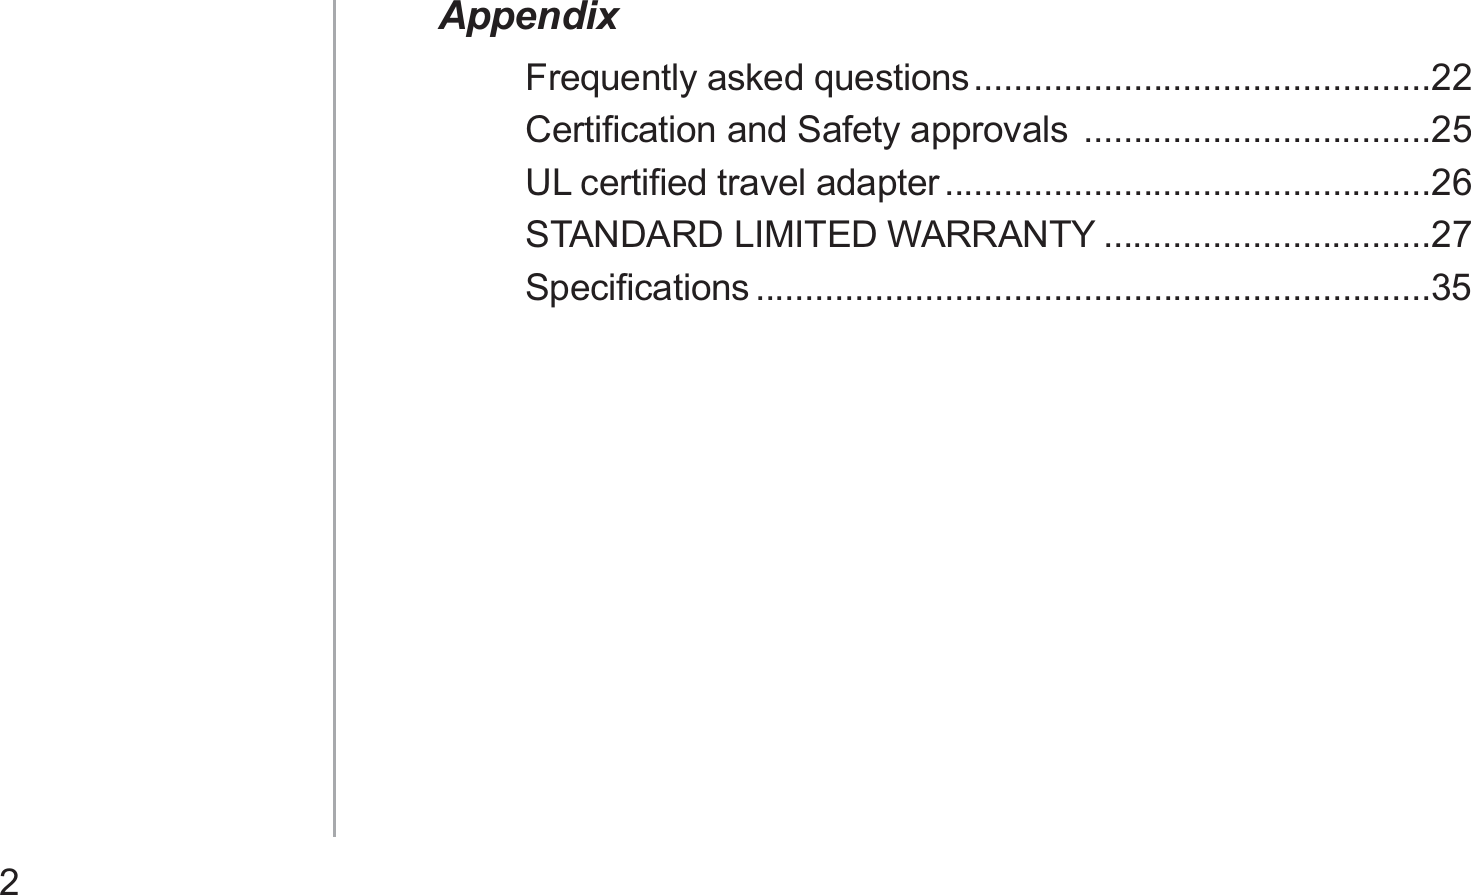 2AppendixFrequently asked questions ..............................................22Certiﬁcation and Safety approvals  ...................................25UL certiﬁed travel adapter .................................................26STANDARD LIMITED WARRANTY .................................27Speciﬁcations ....................................................................35